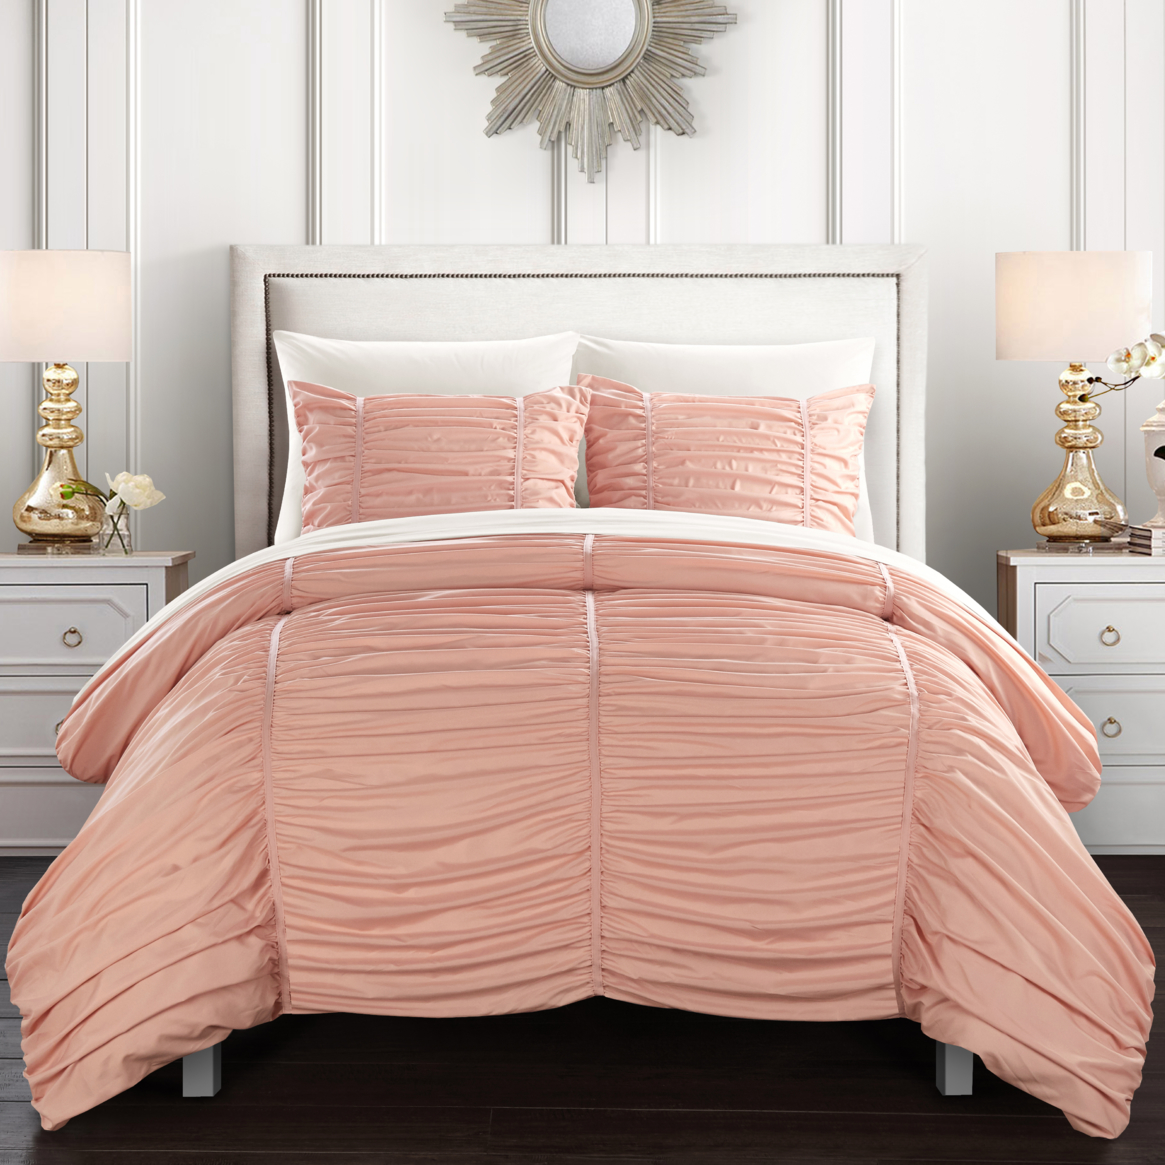 Kleia 7 Or 5 Piece Comforter Set Contemporary Striped Ruched Ruffled Design Bed In A Bag - Coral, Queen